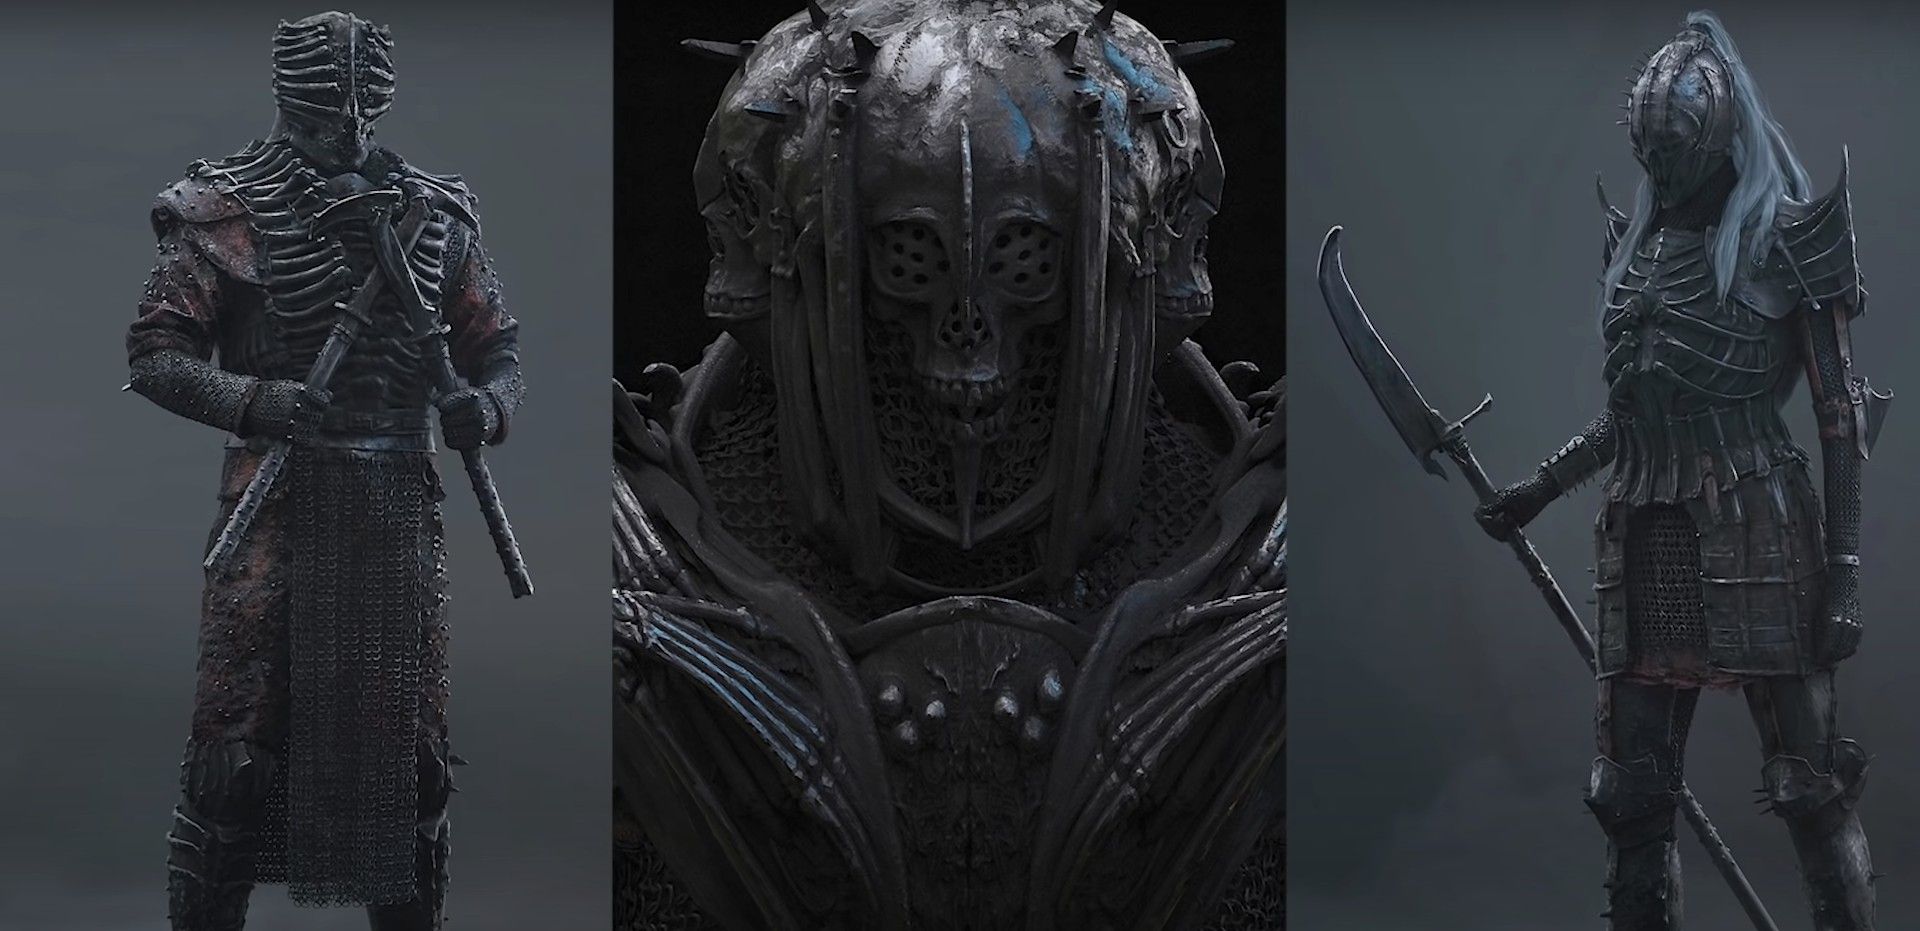 Wild Hunt concept art from The Witcher season 2